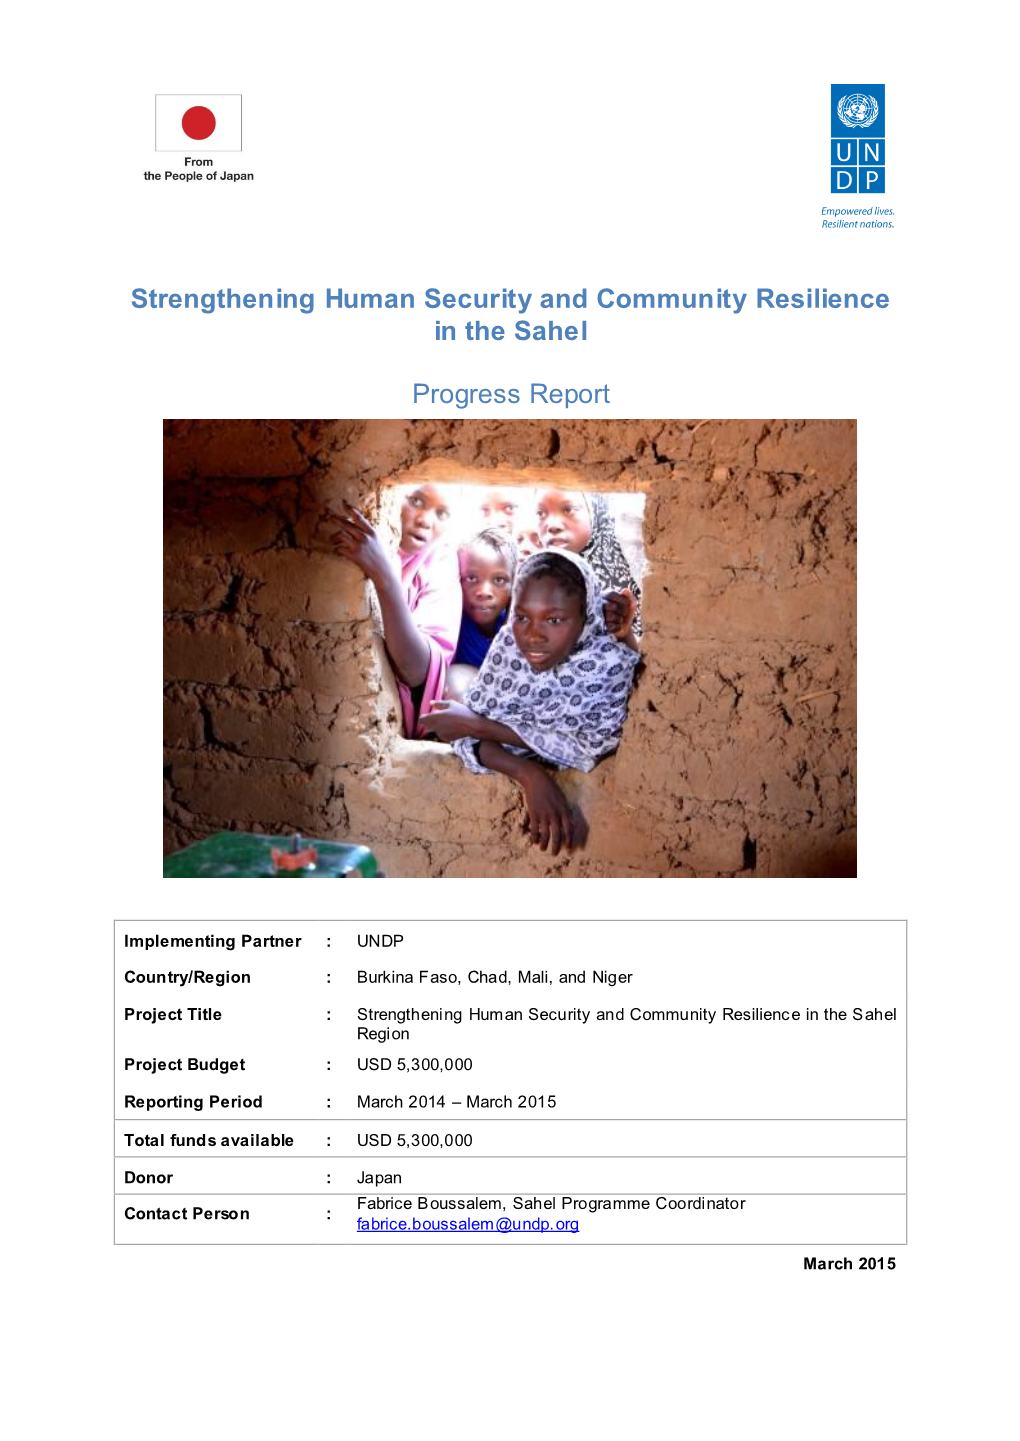 Strengthening Human Security and Community Resilience in the Sahel